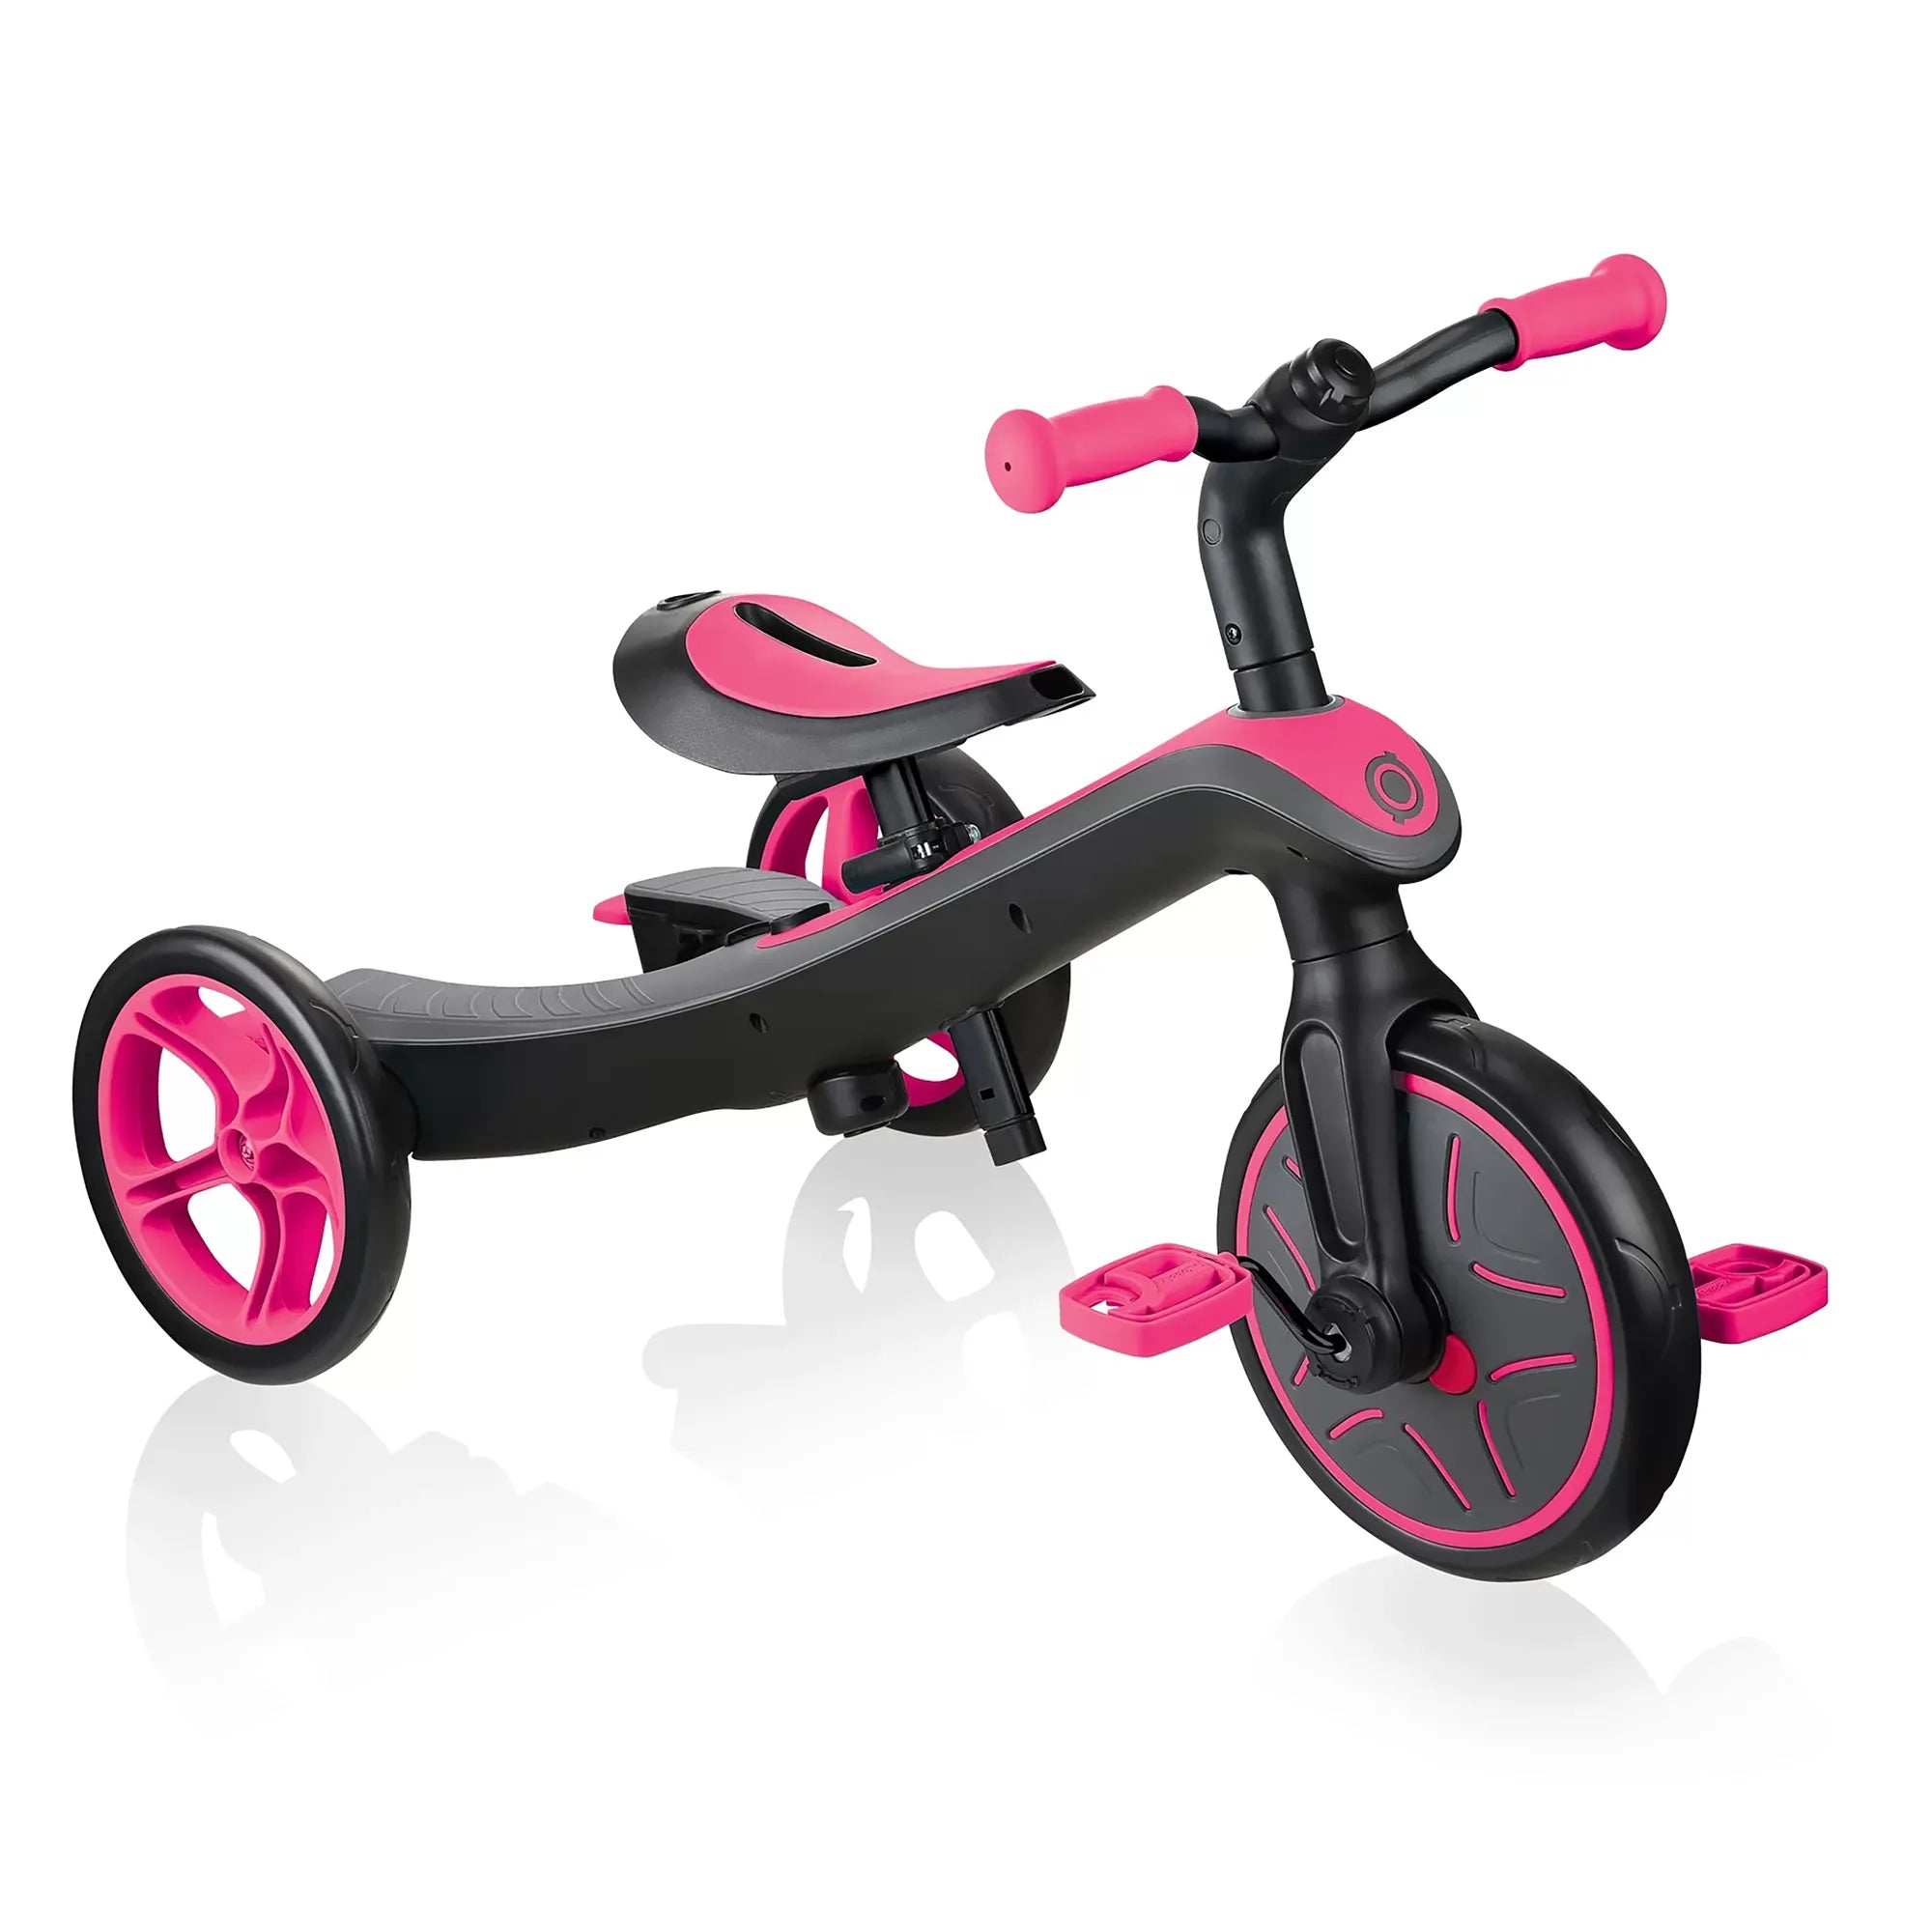 Globber Explorer Trike 4 in 1, Fuschia Pink, Training Trike Mode, Front View, Browns Hobby & Game.